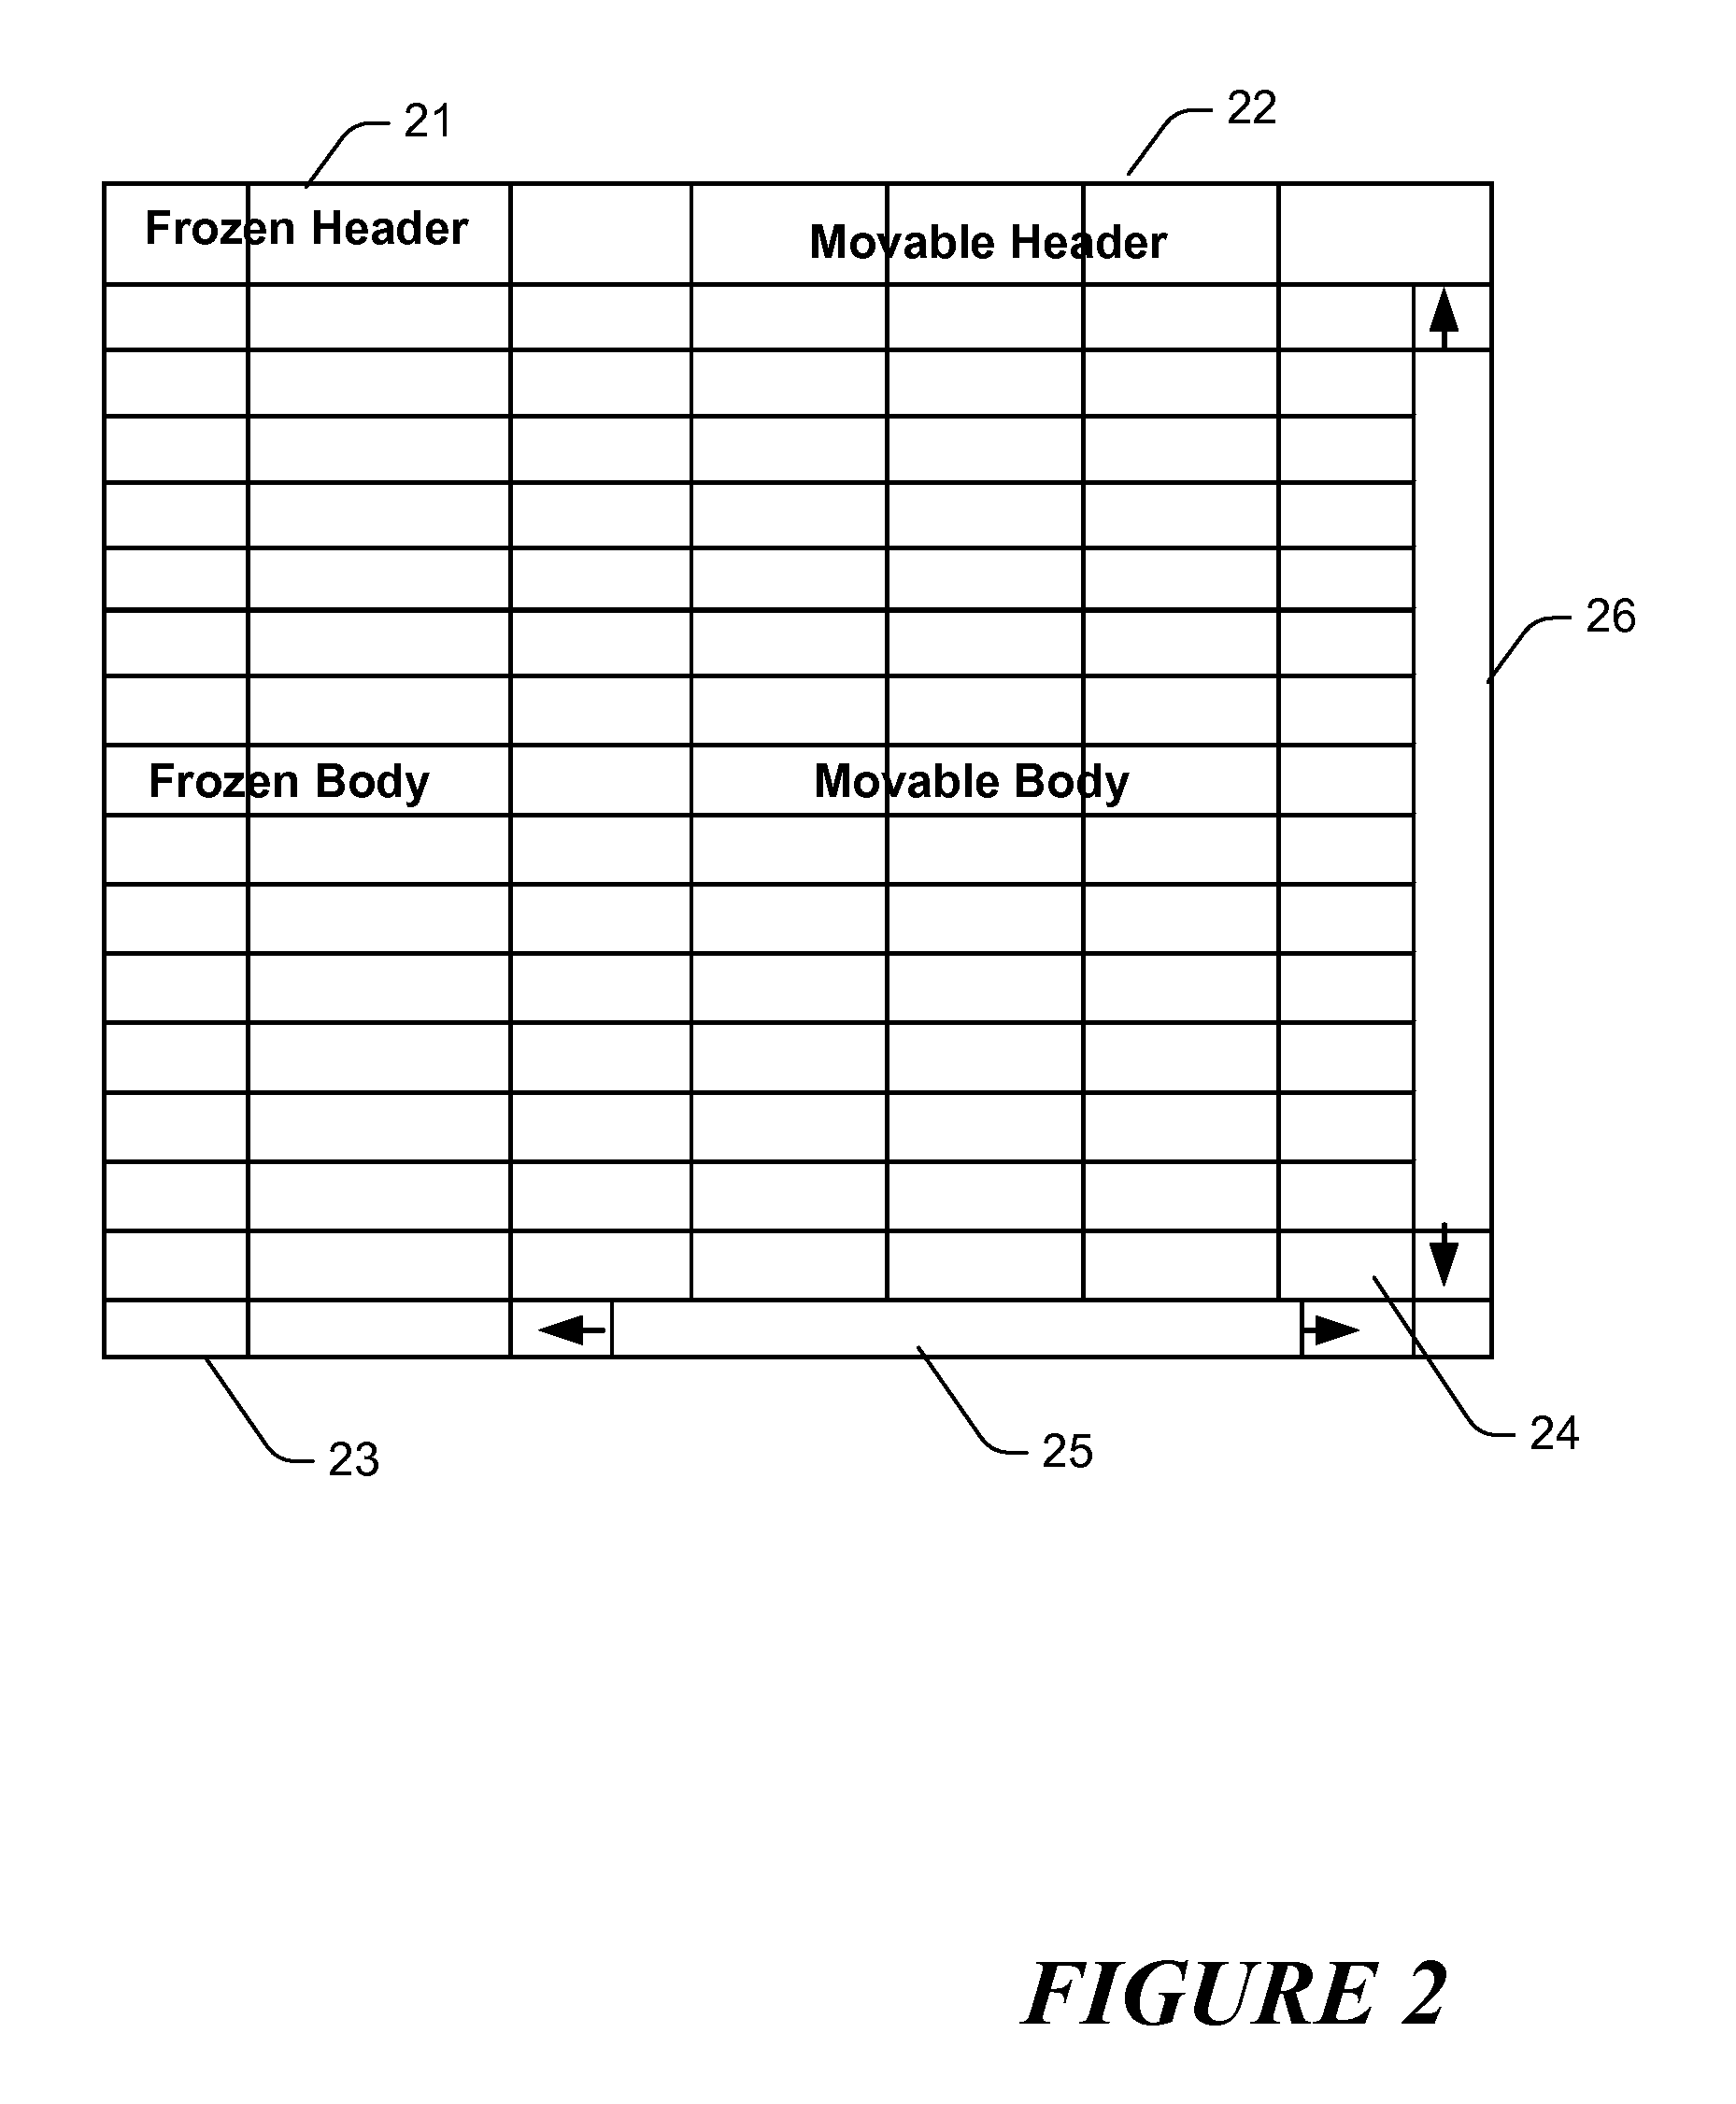 Method and System for Localized Scrolling Table Display in a Webpage